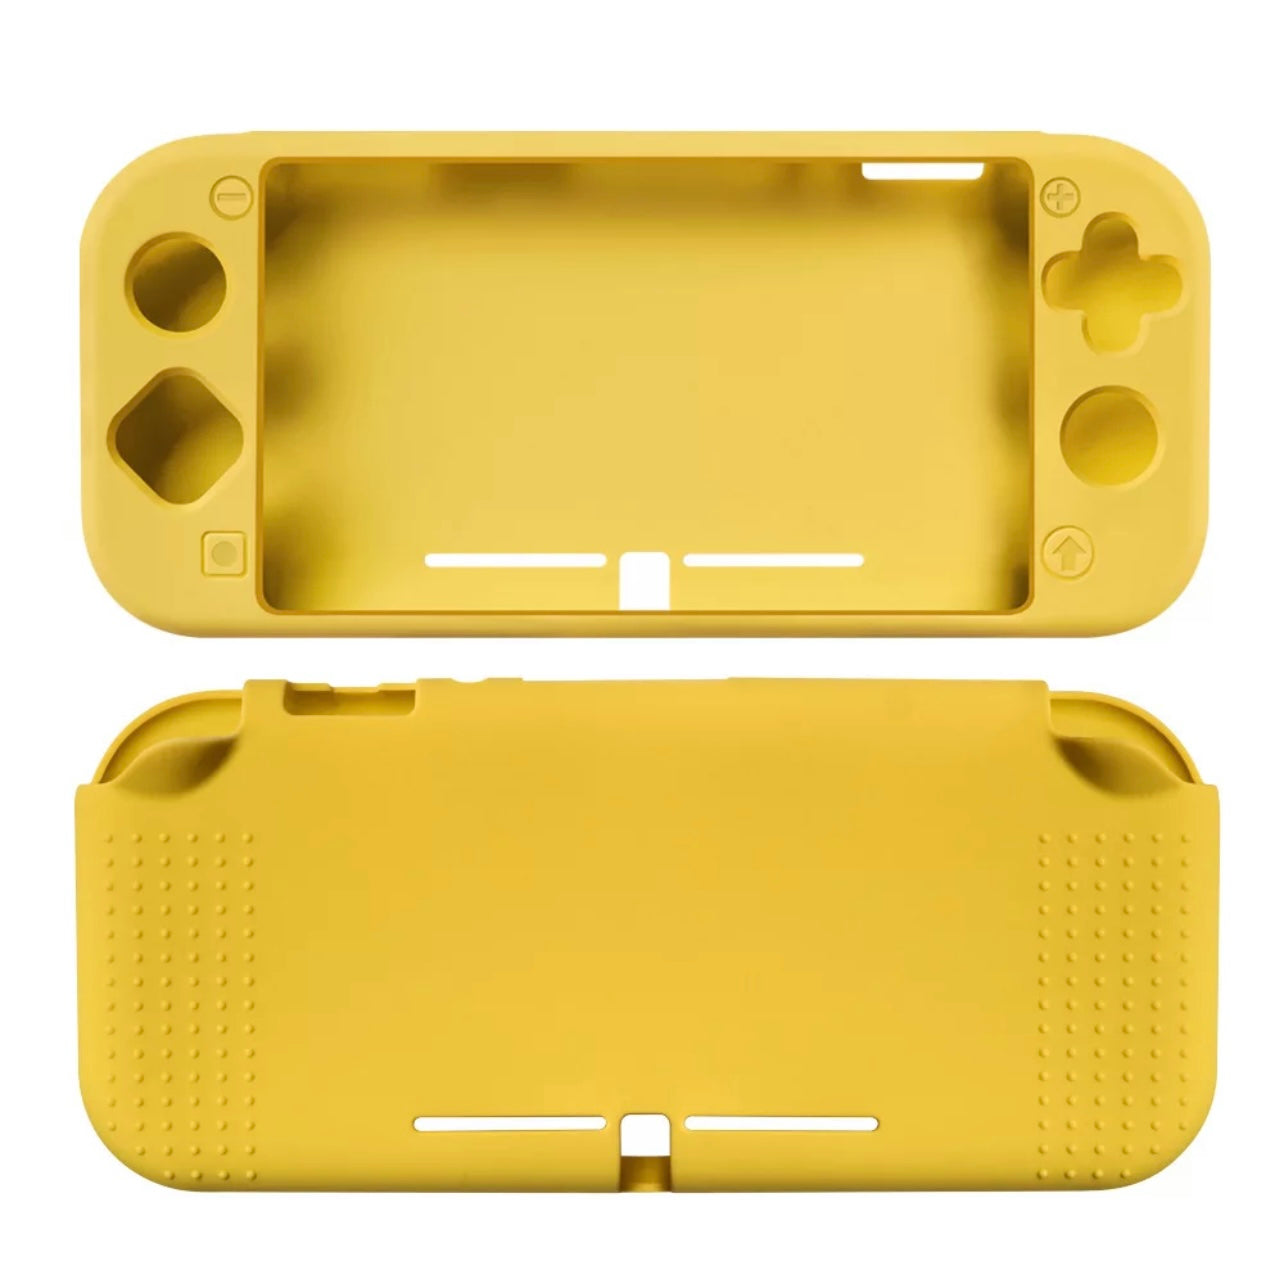 Nintendo Switch Lite Yellow Full Silicone Shell Cover Case